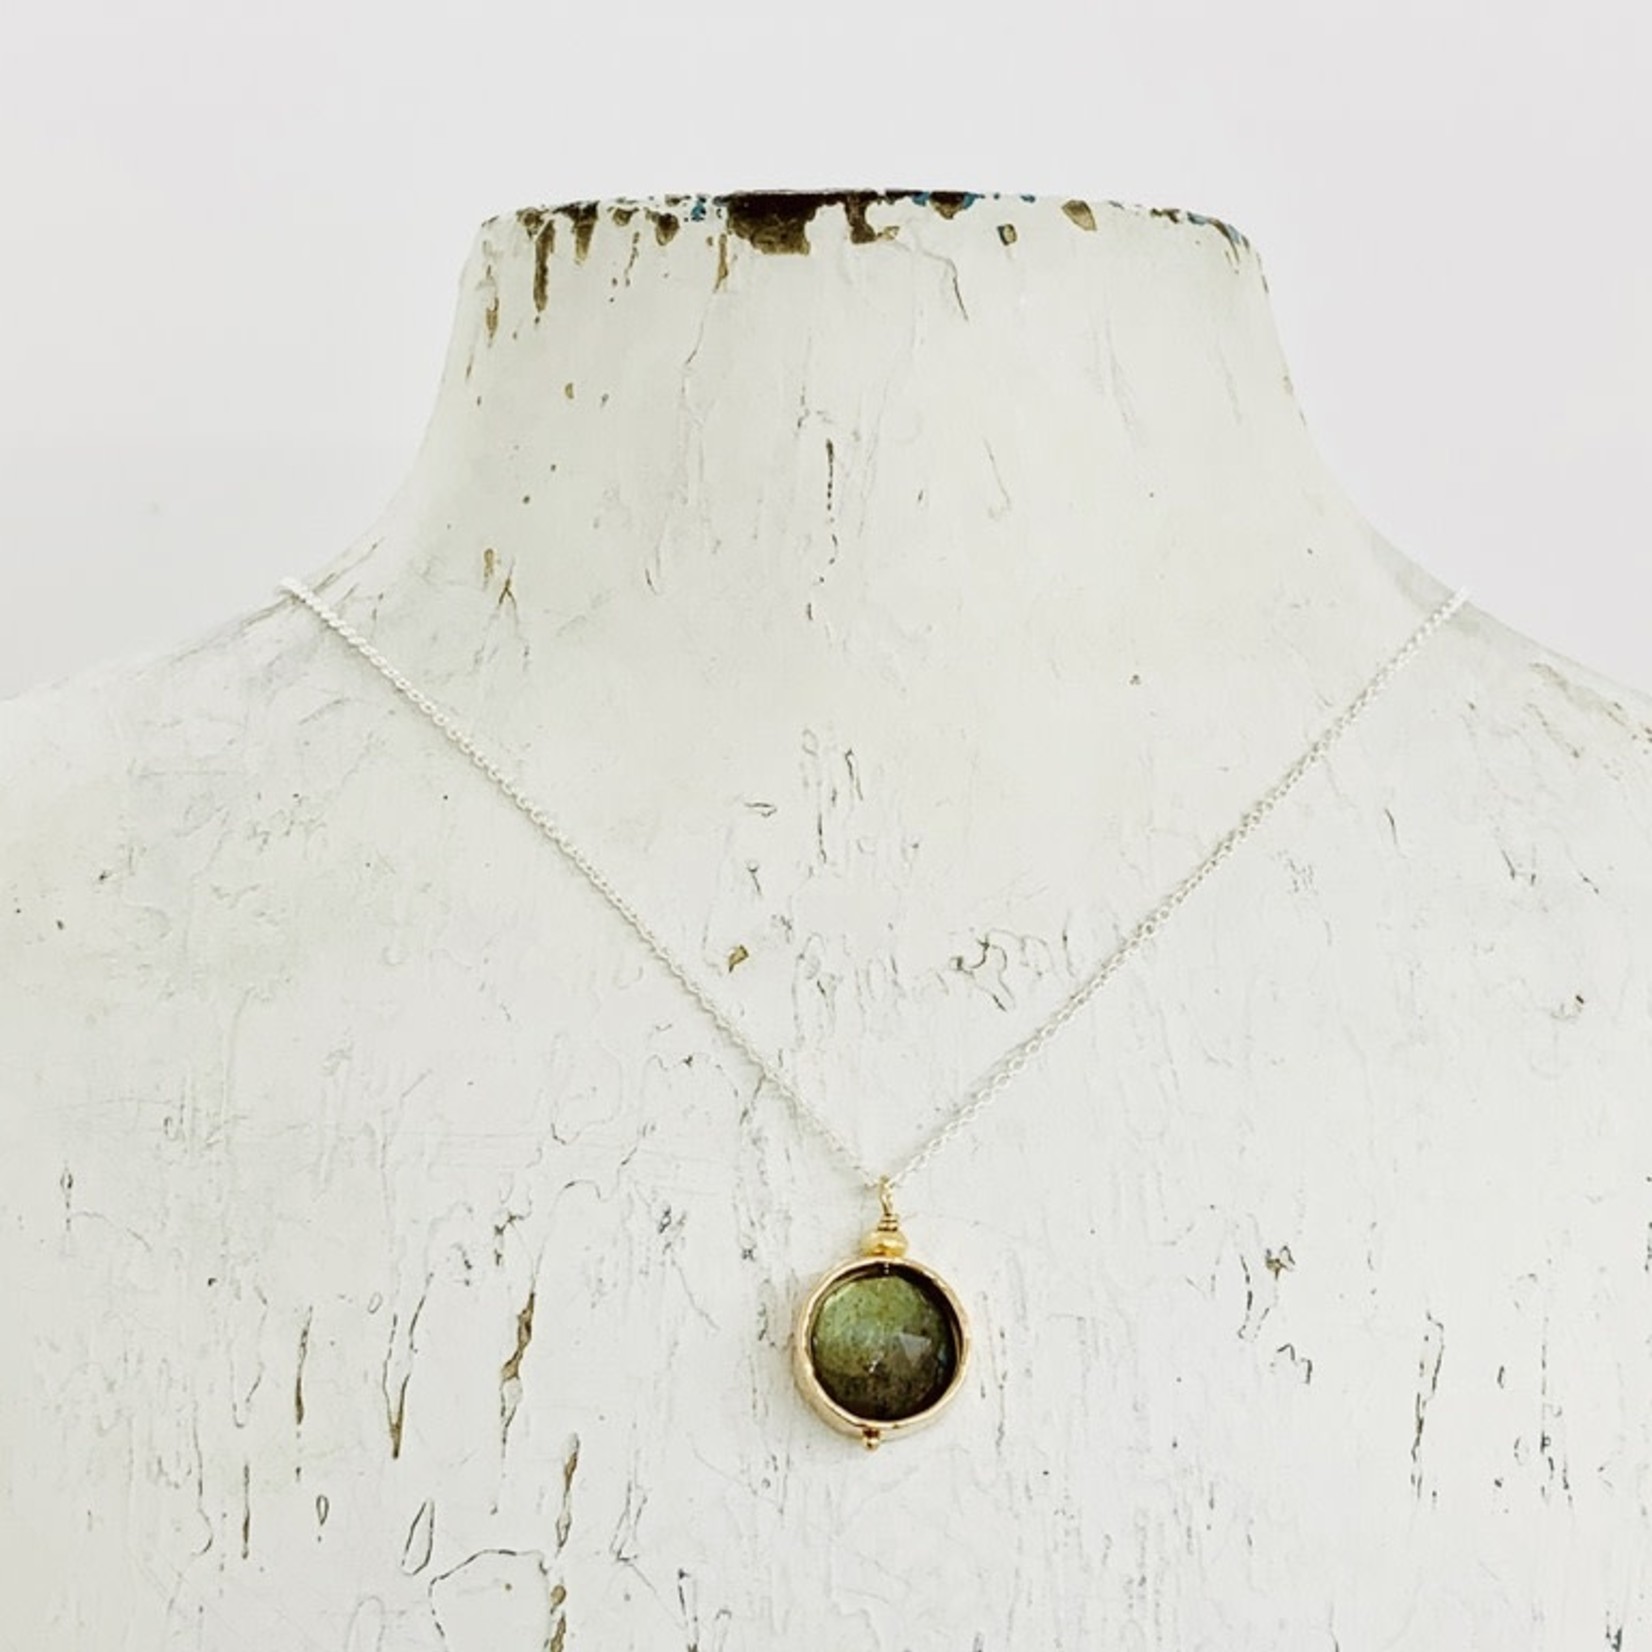 Handmade Necklace with 8mm Faceted Labradorite Coin in 14k Gold Filled Circle on Sterling Chain